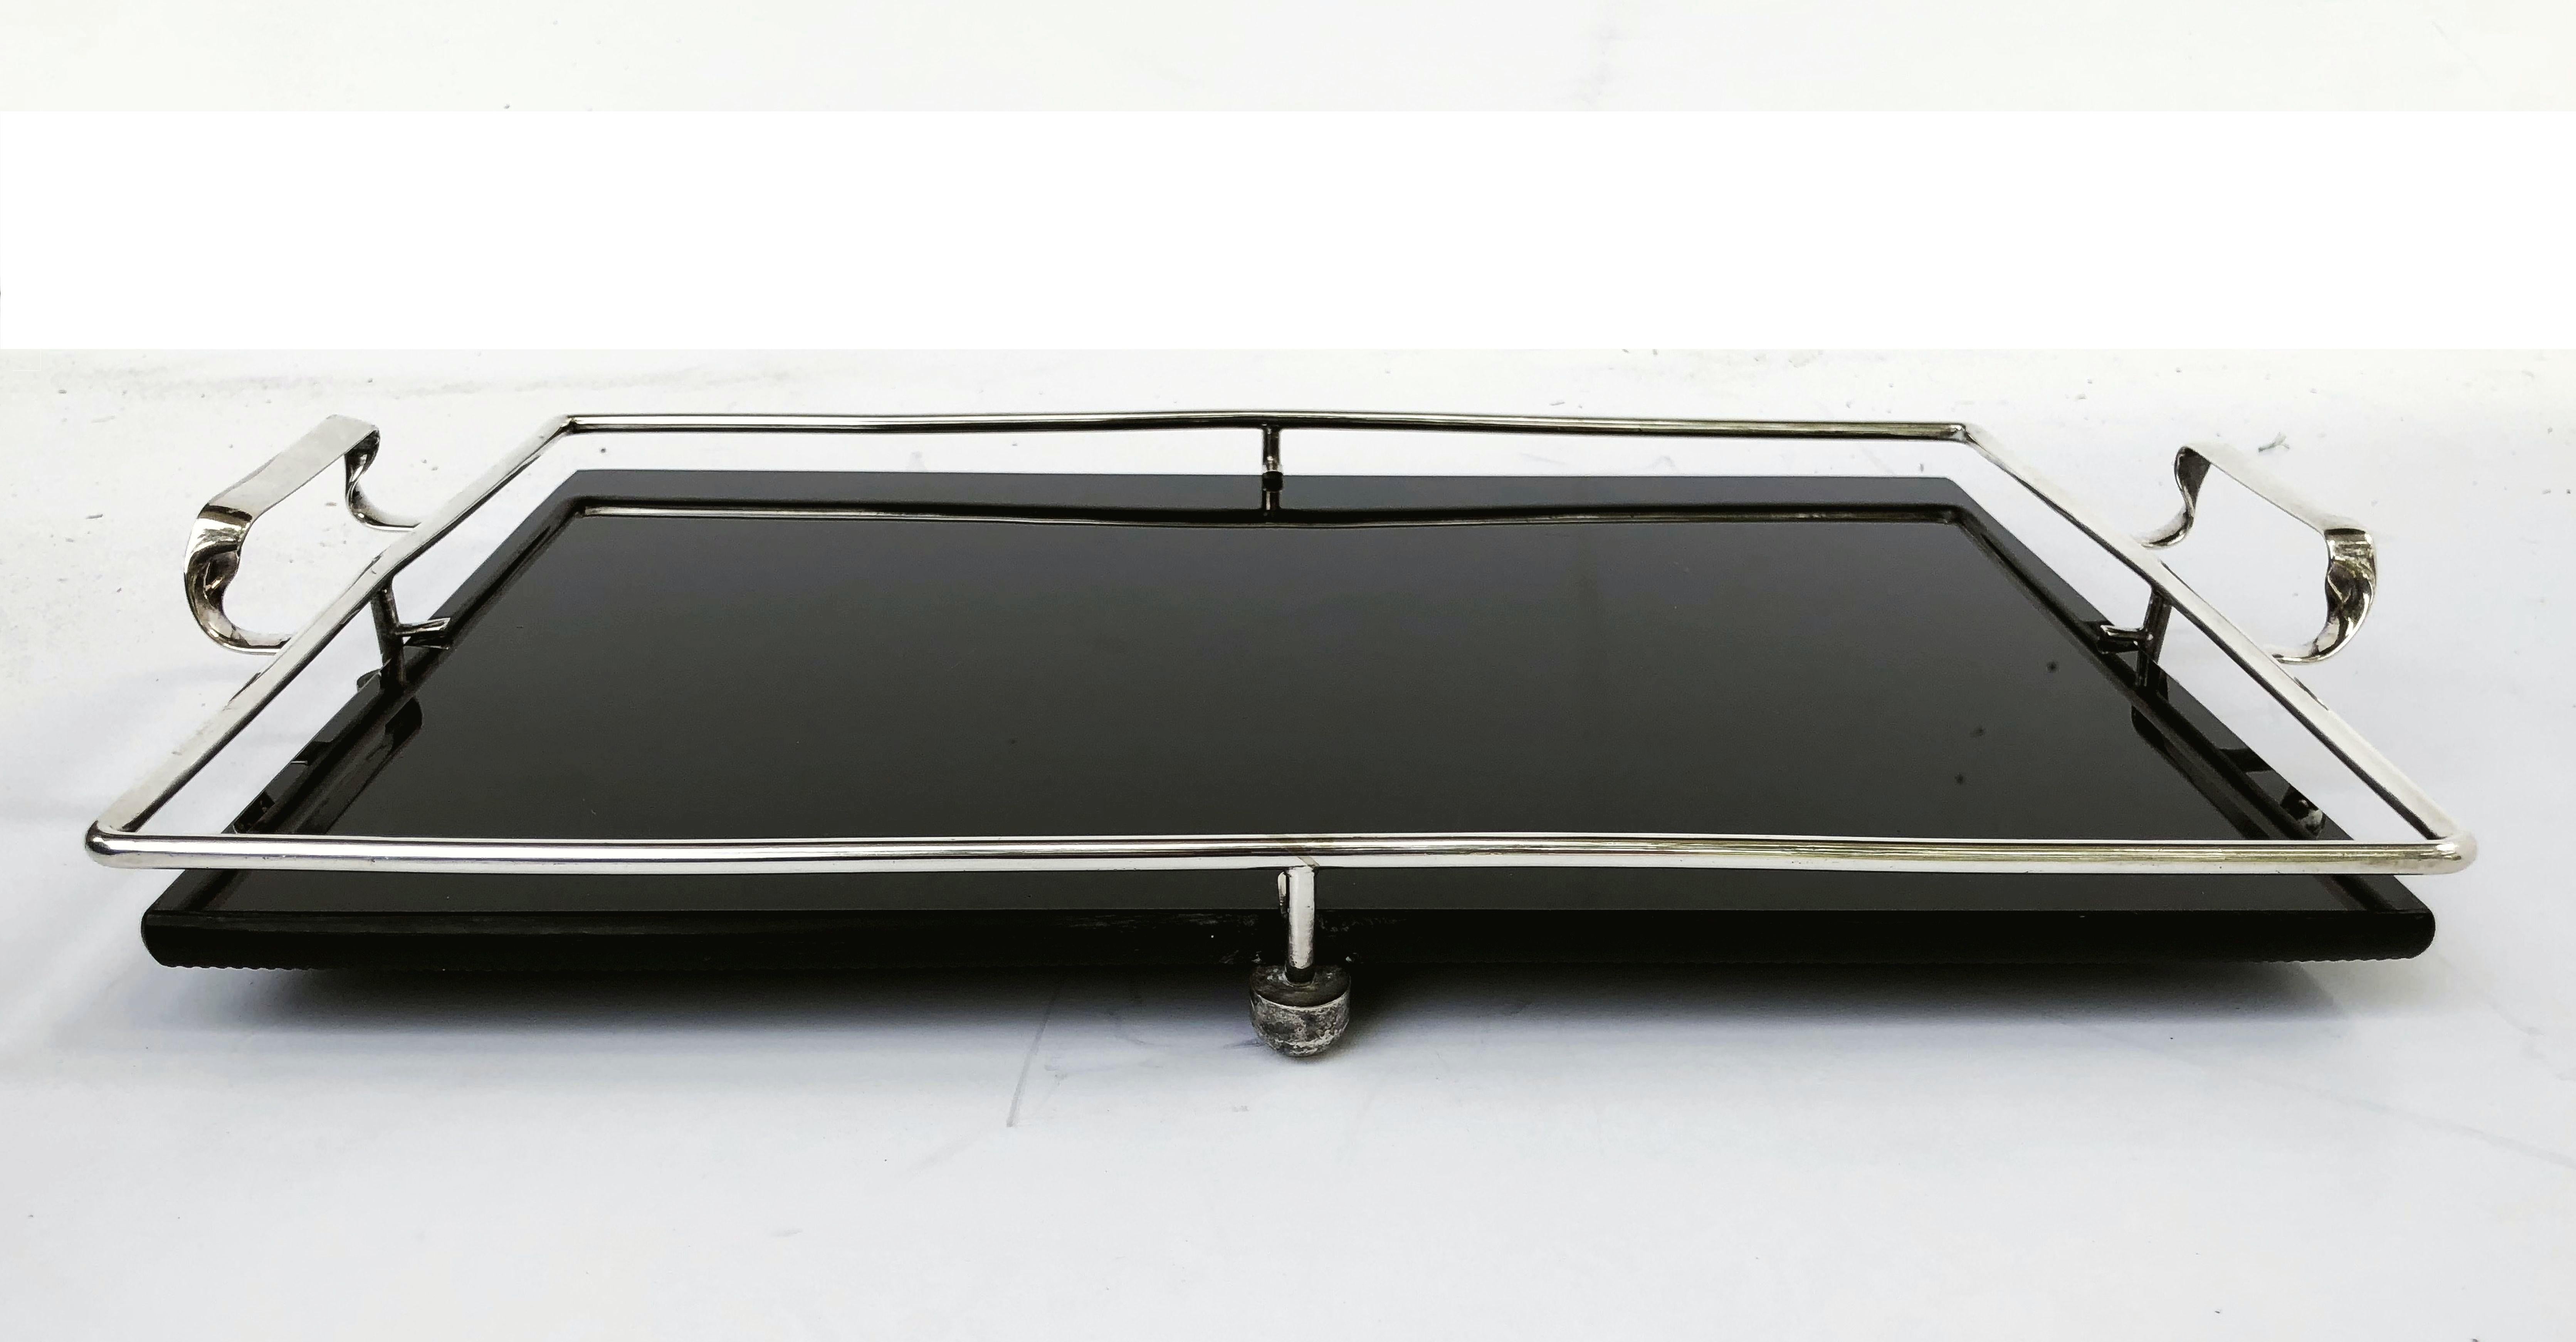 English Serving Tray of Black Glass and Chrome from the Art Deco Period 1